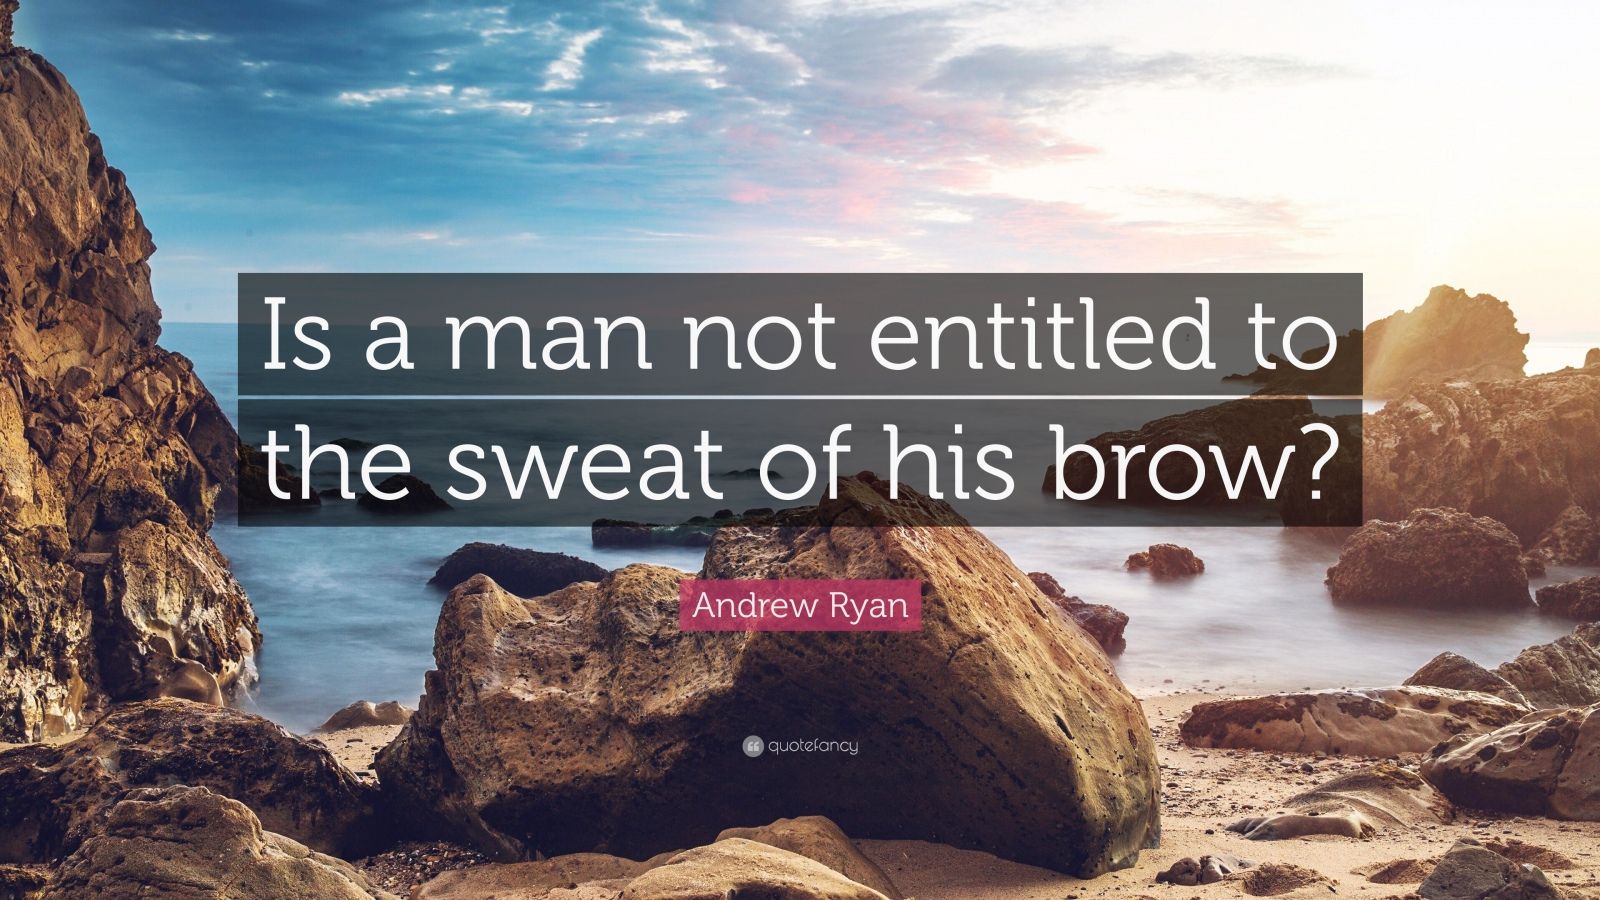 Andrew Ryan Quote: "Is a man not entitled to the sweat of his brow?" (12 wallpapers) - Quotefancy